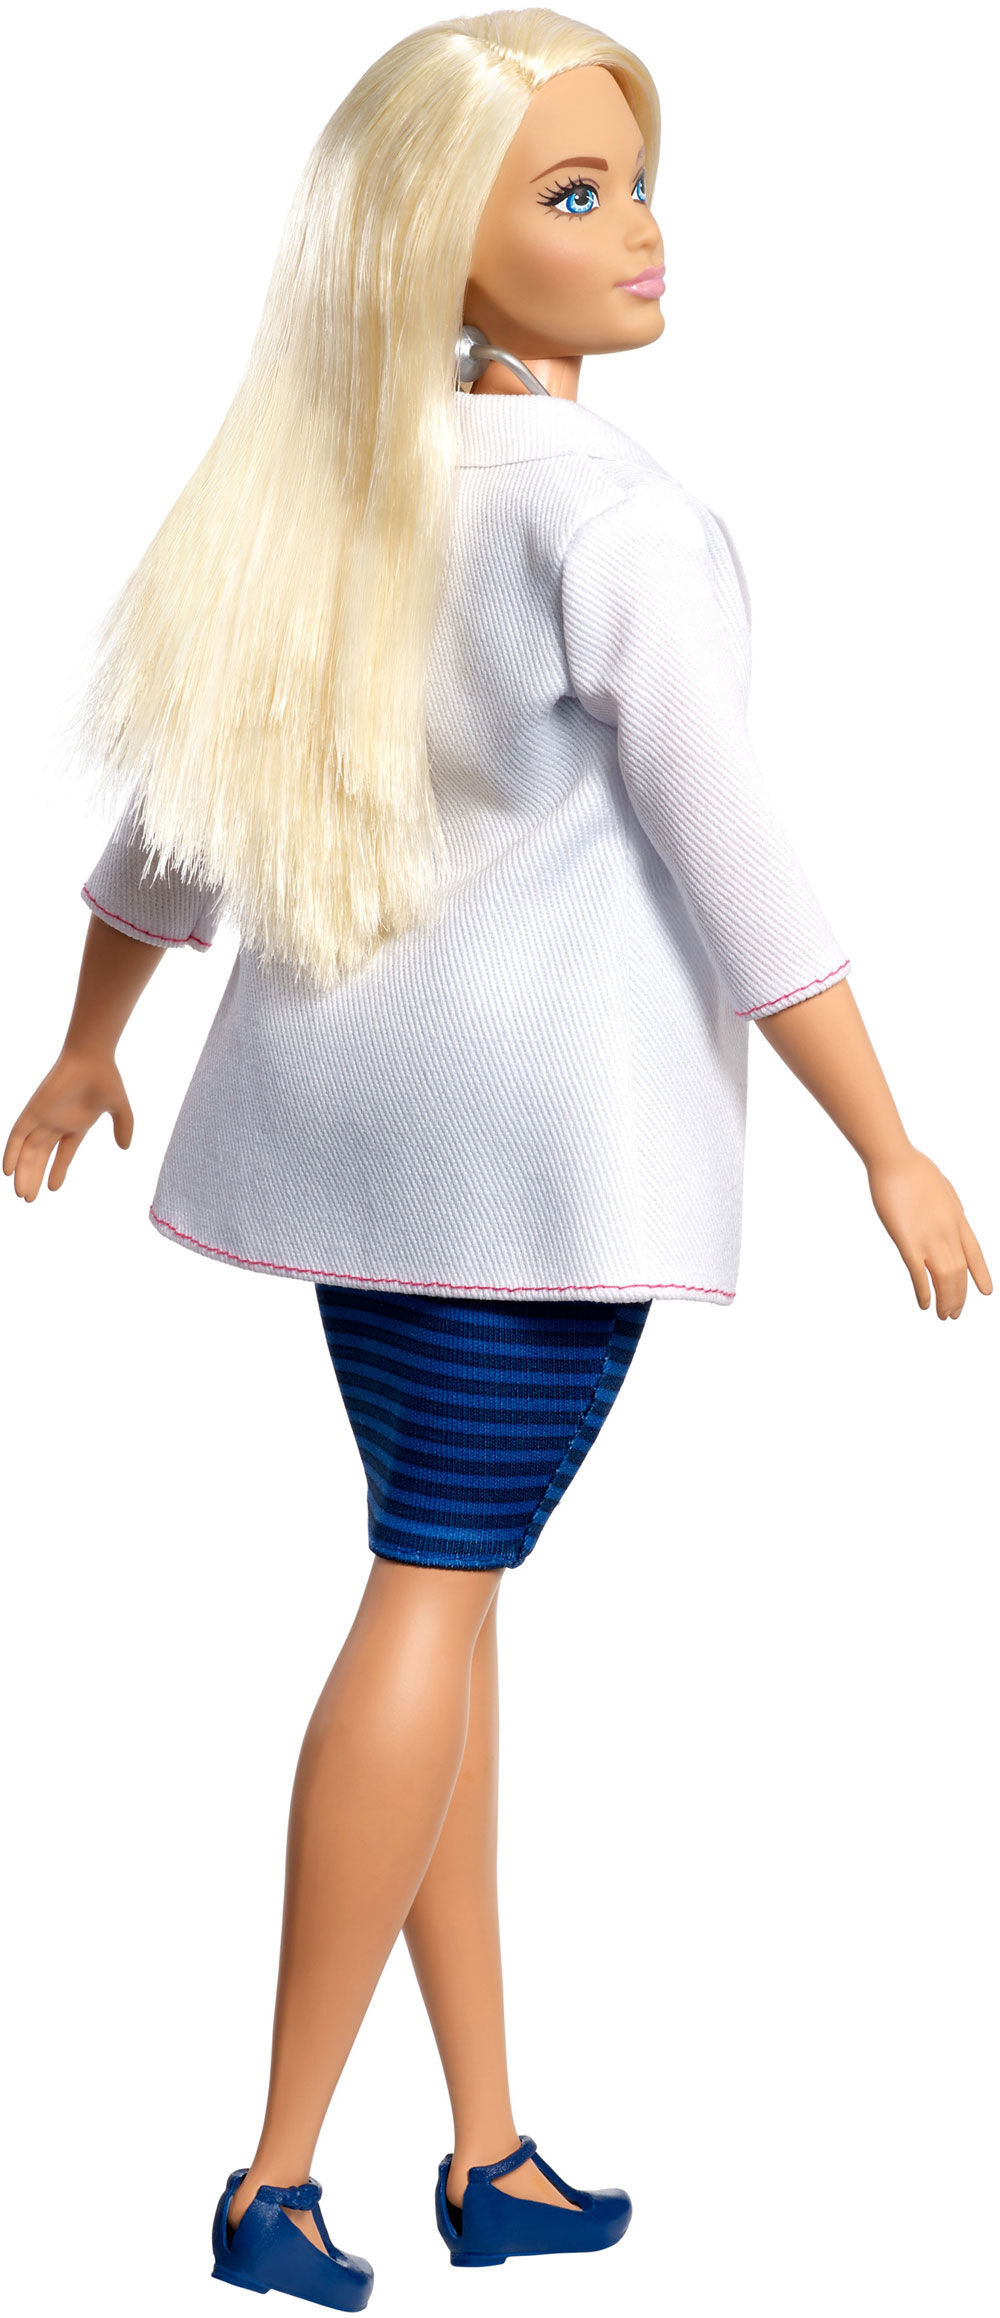 barbie as a doctor